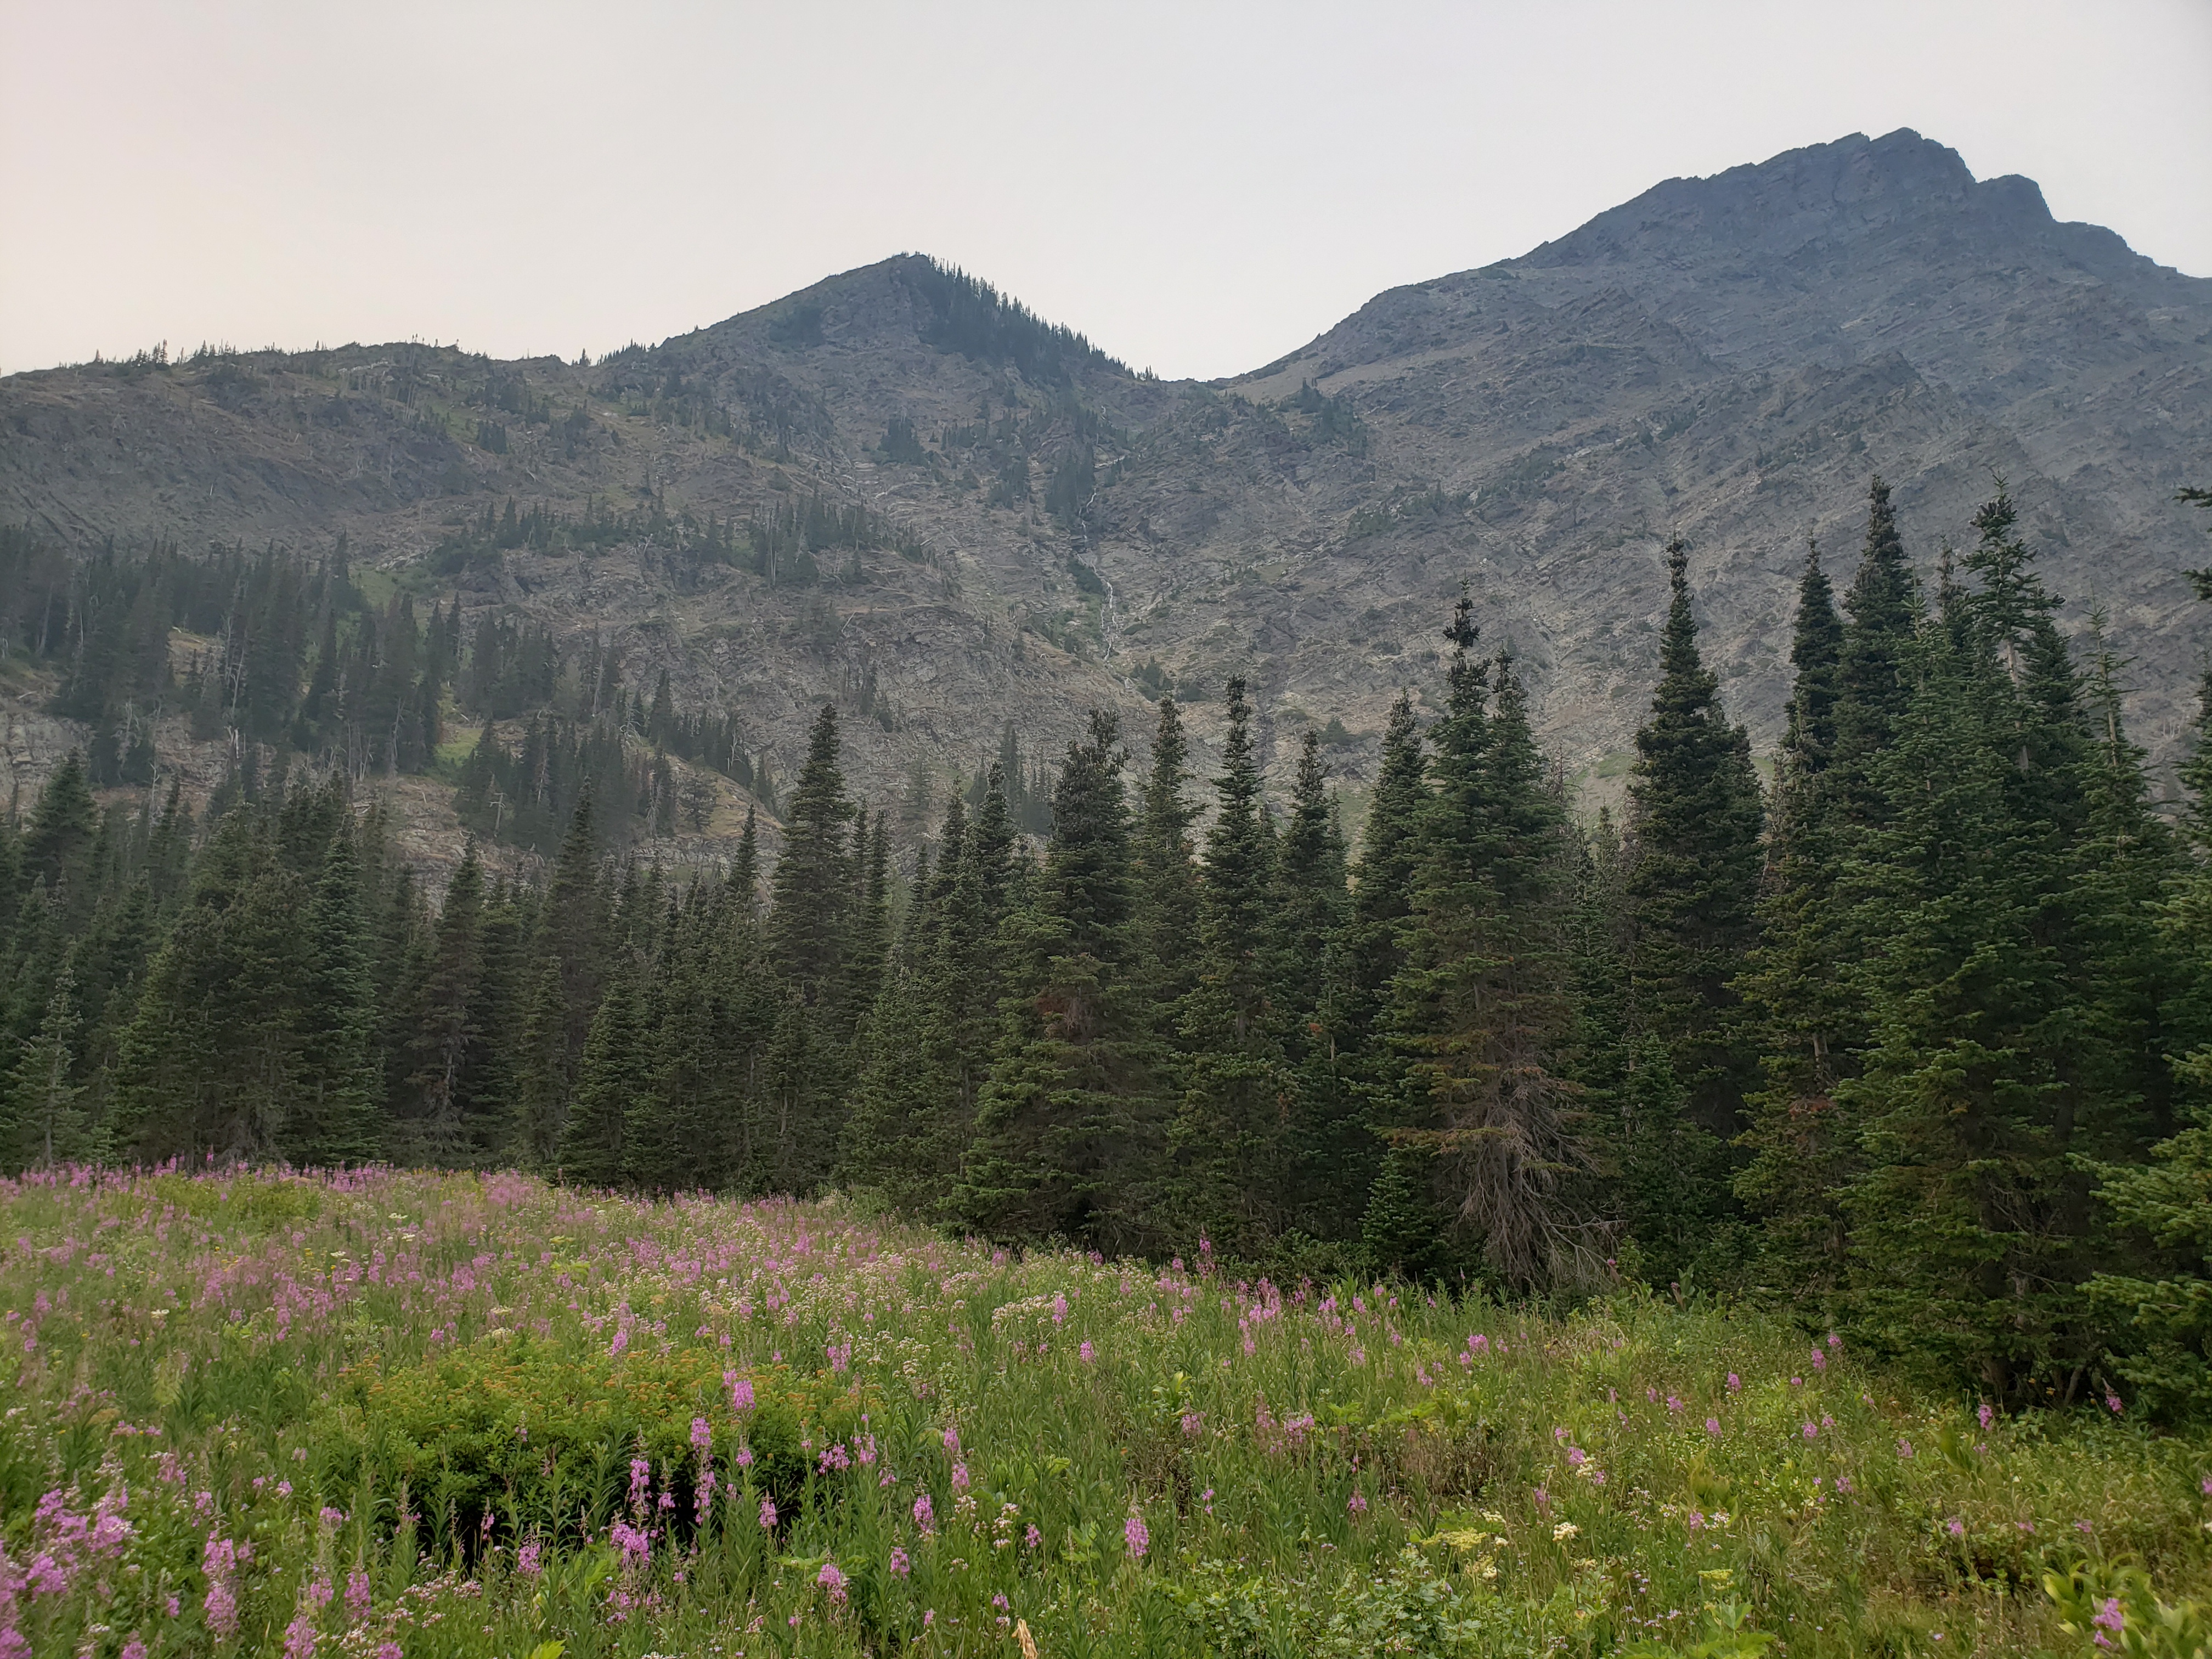 Bertha Peak in background with wildflowers and pine trees in foreground